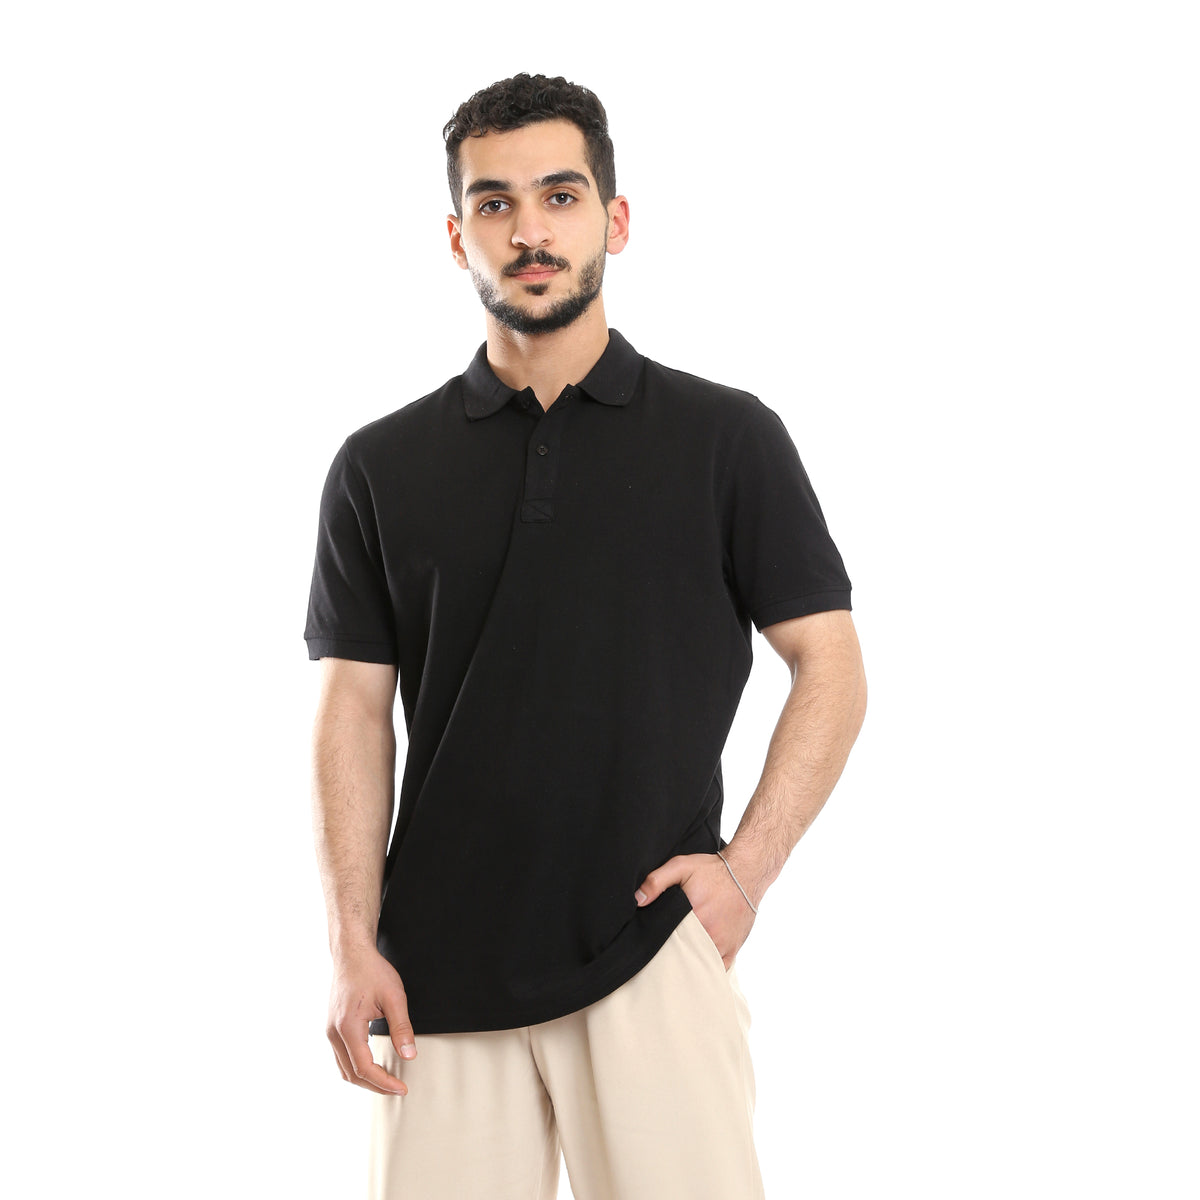 Red Cotton Polo T-Shirt for Men | Comfortable & Basic-Black